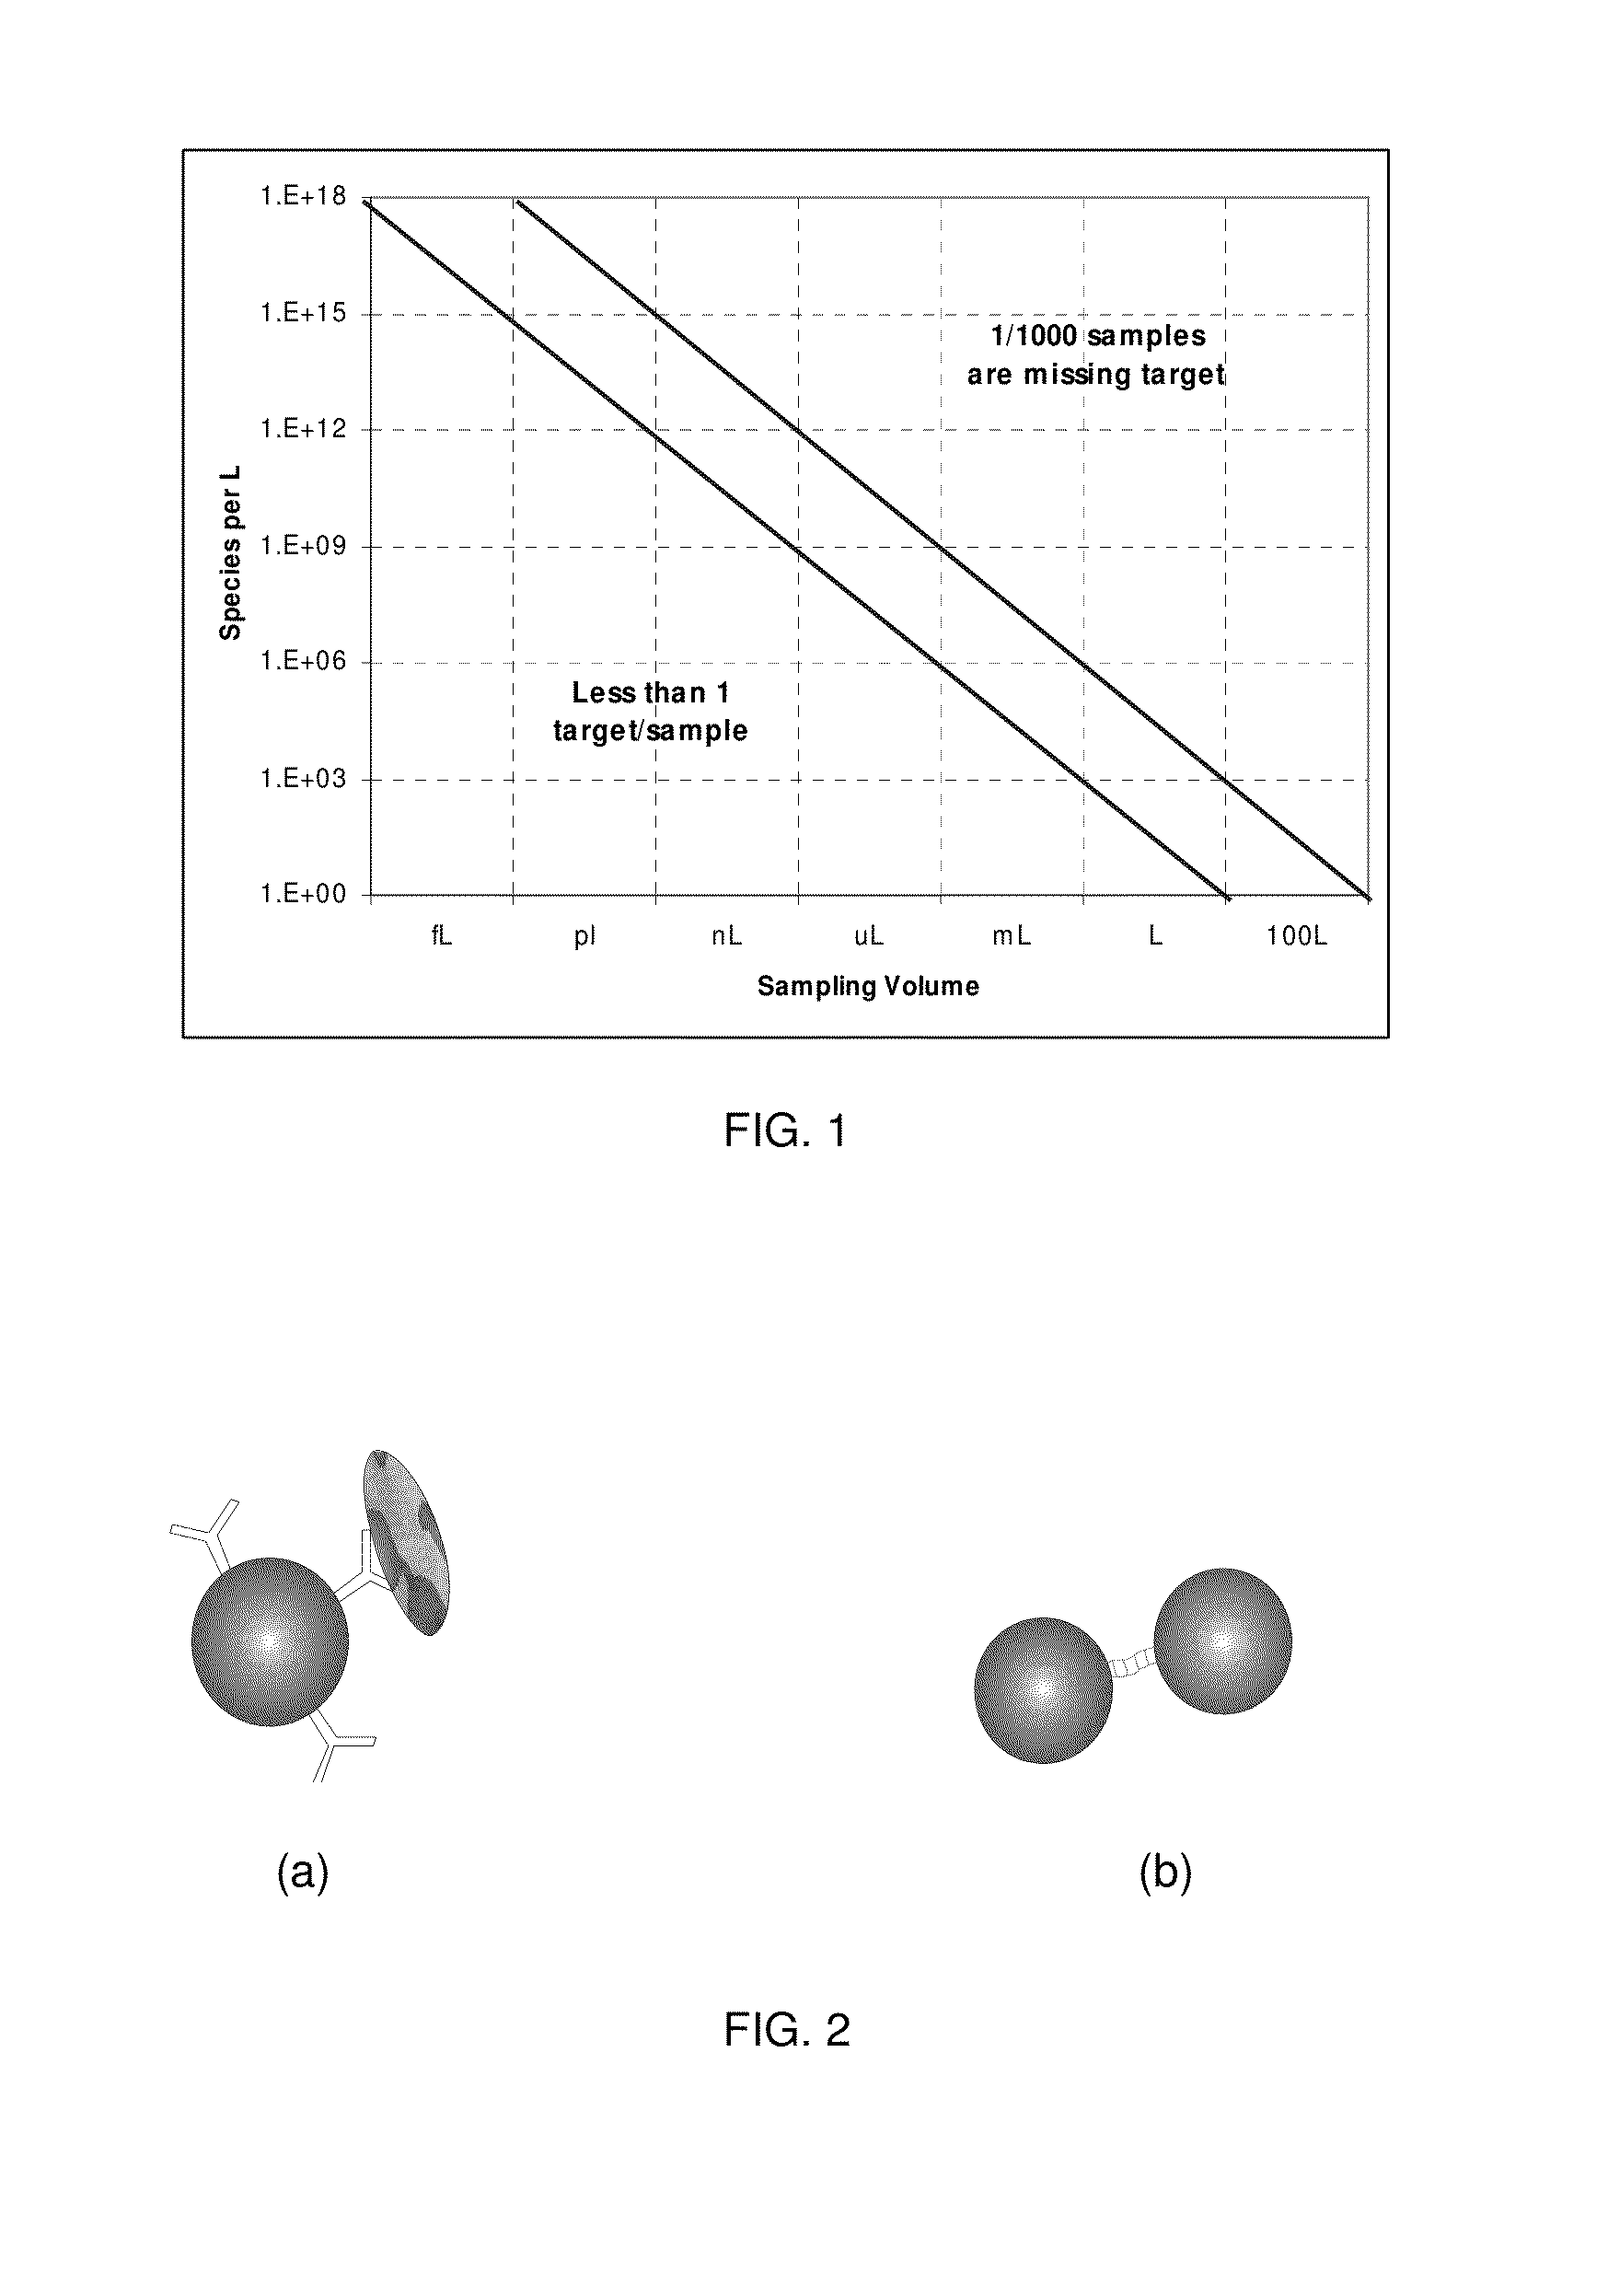 Fluidized bed detector for continuous, ultra-sensitive detection of biological and chemical materials